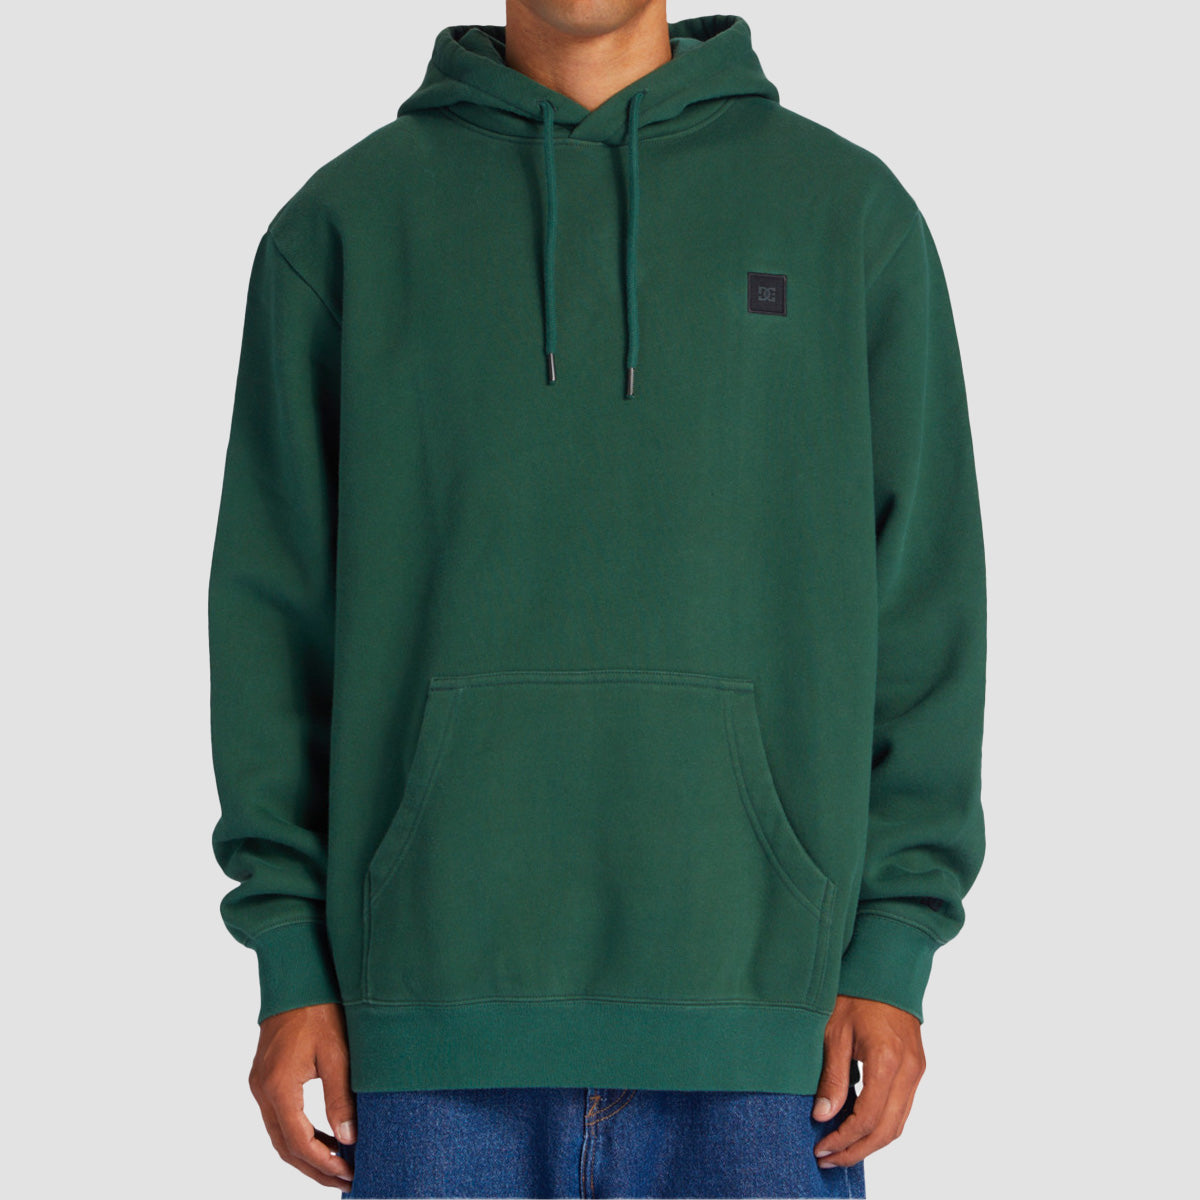 DC 1994 Pullover Hoodie Sycamore Garment Dye